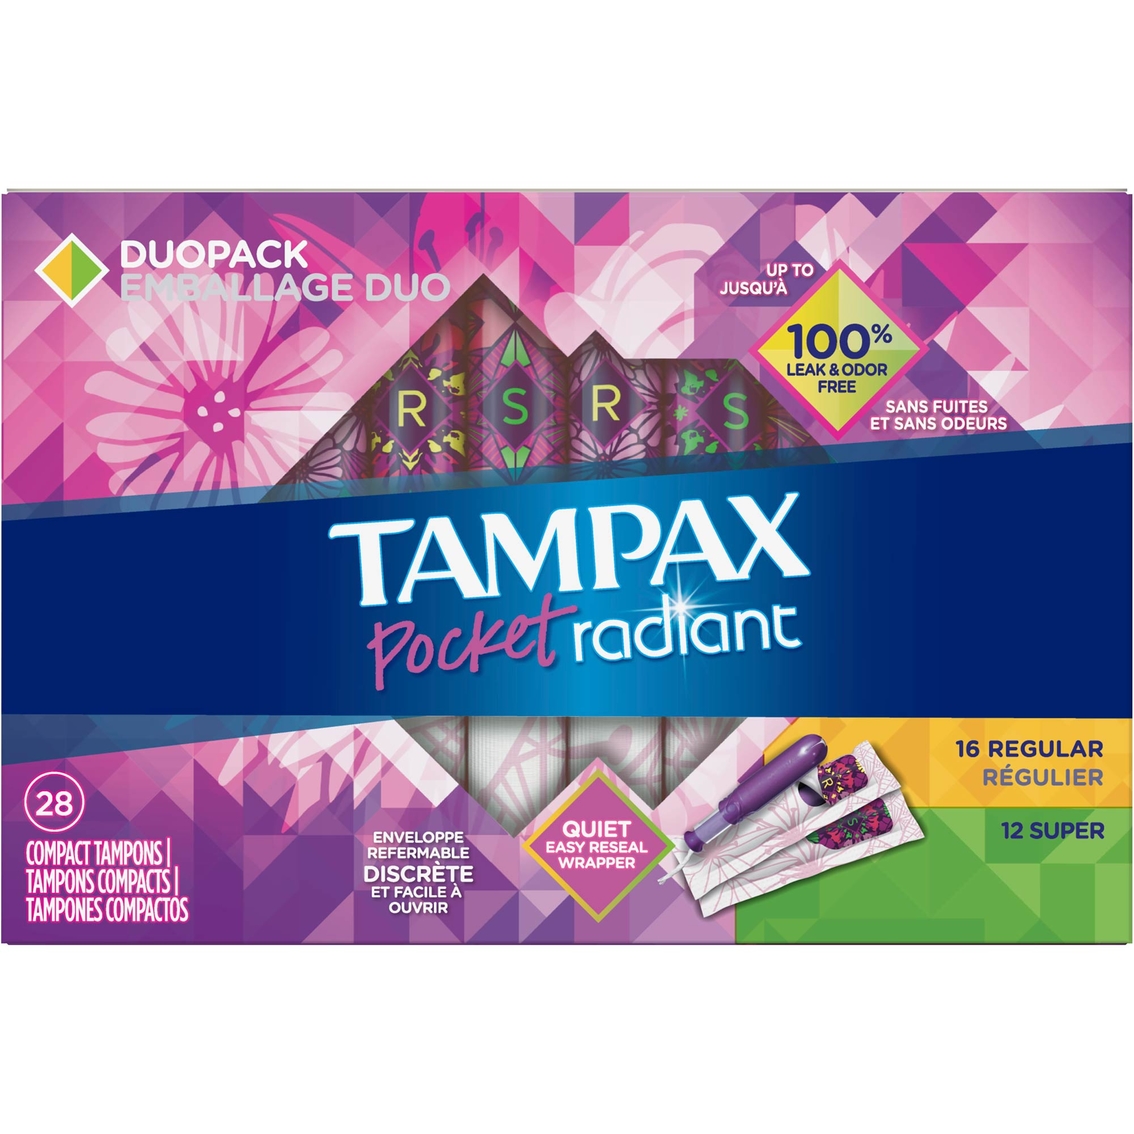 What's in My Bag? + Discreet Protection with Tampax Pocket Pearl - Finding  Zest